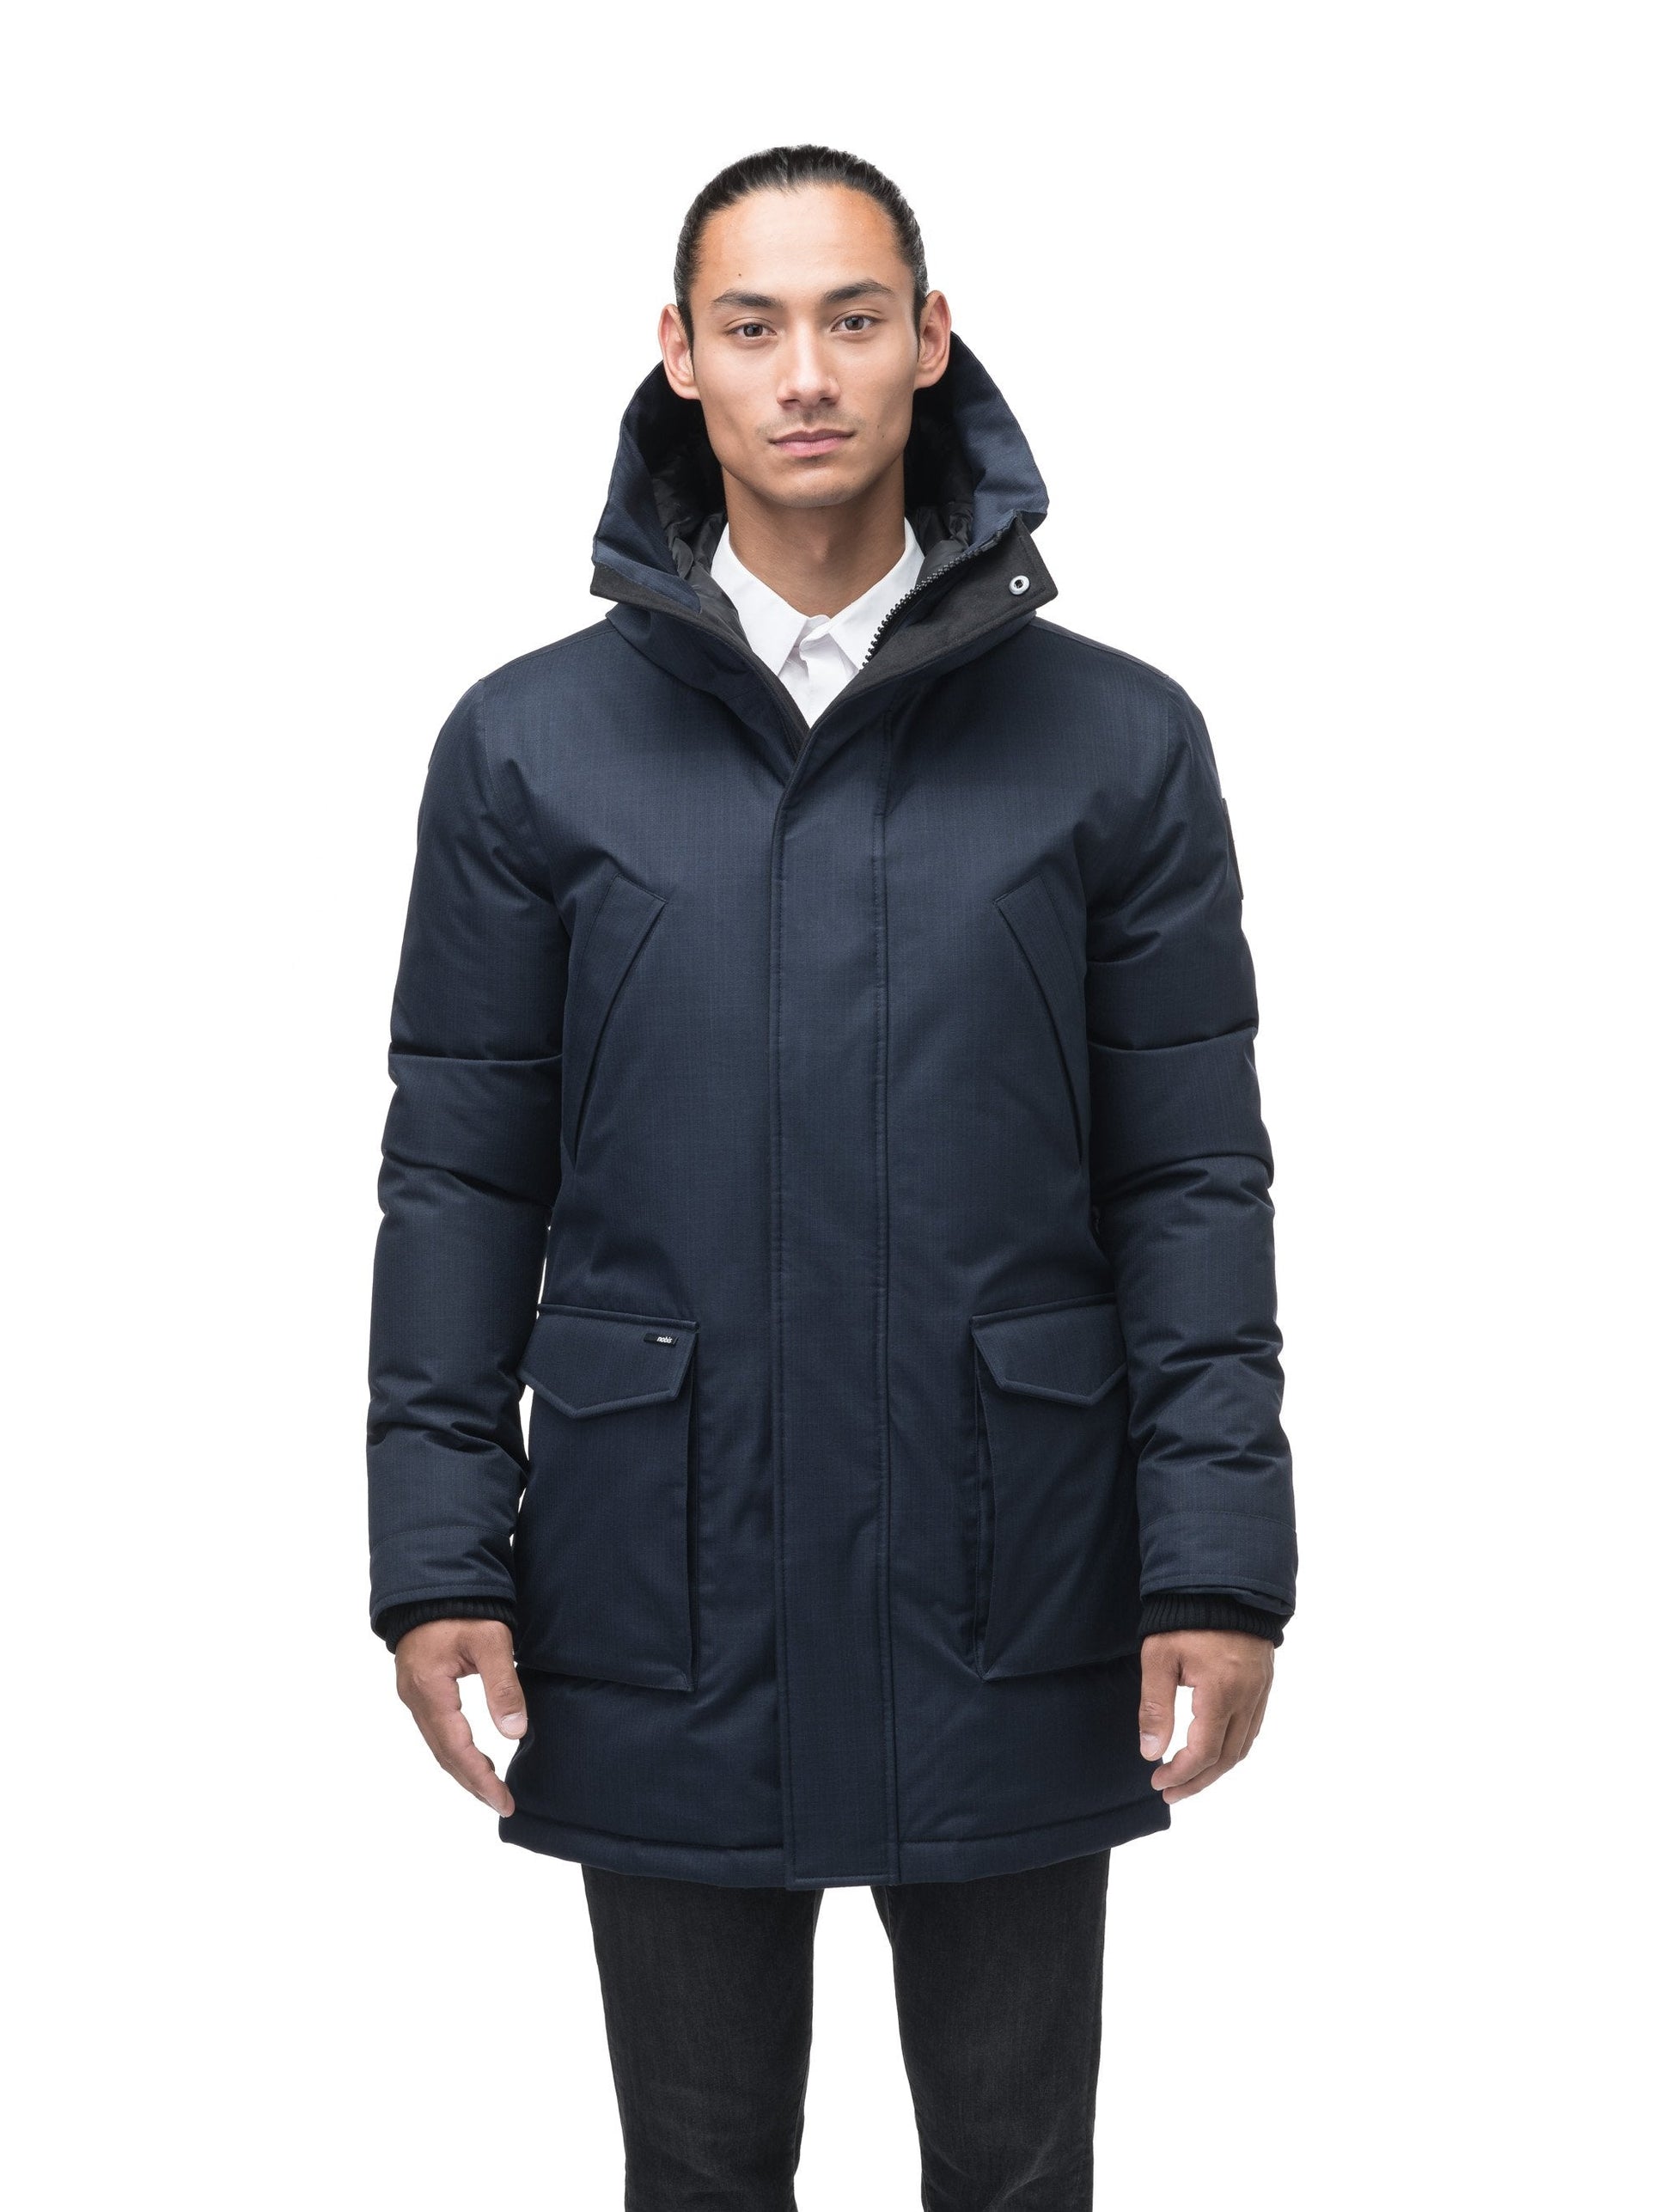 Men's thigh length down-filled parka with non-removable hood in Navy